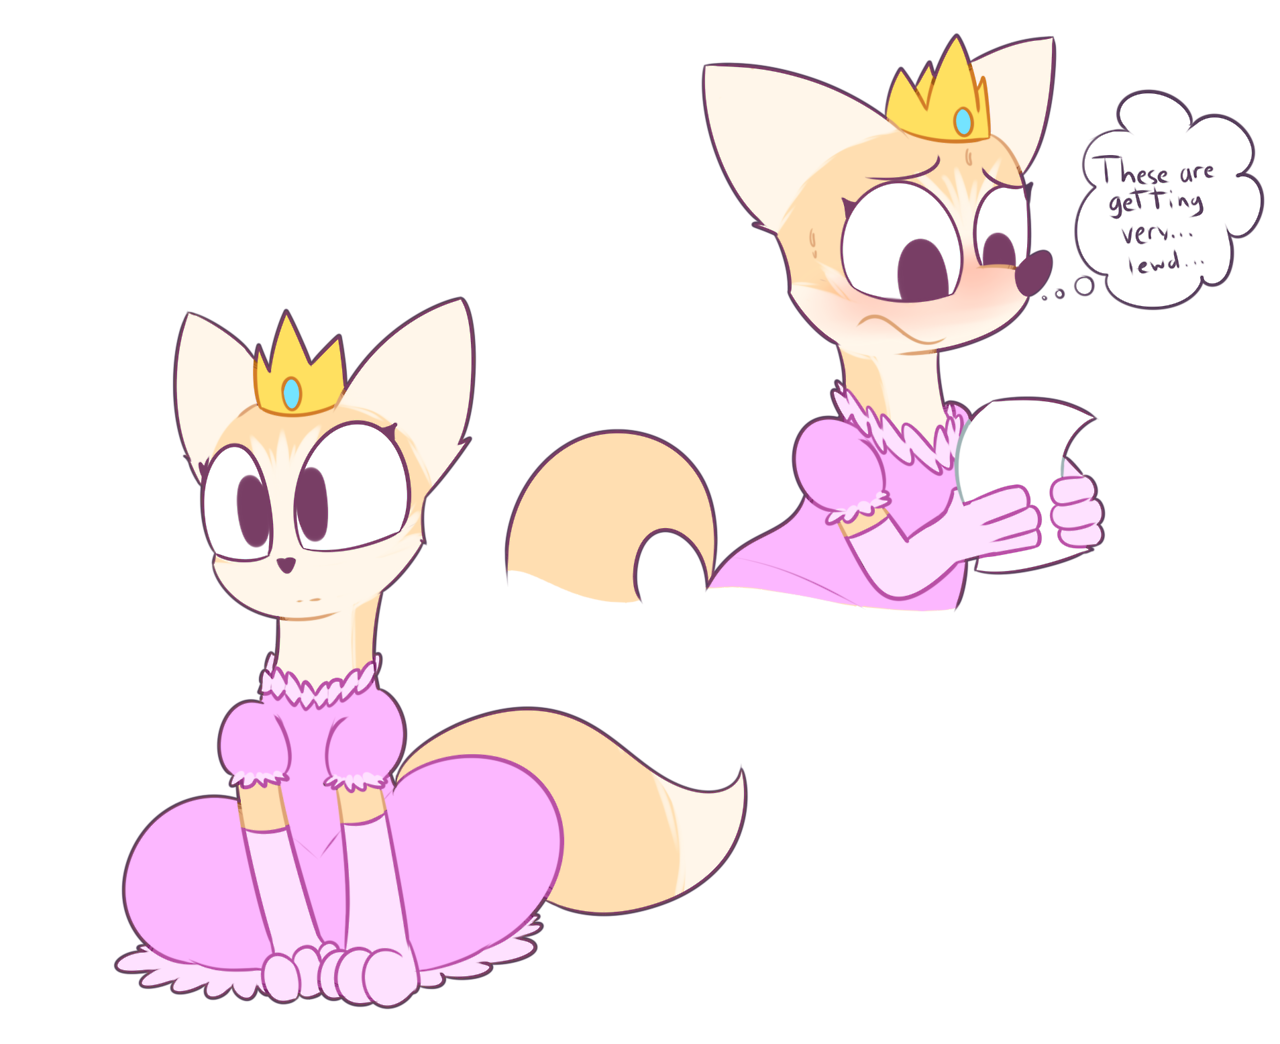 mr-degradation-sfwarts:Queen redesign, she’s a corsac! She also needs to hire someone